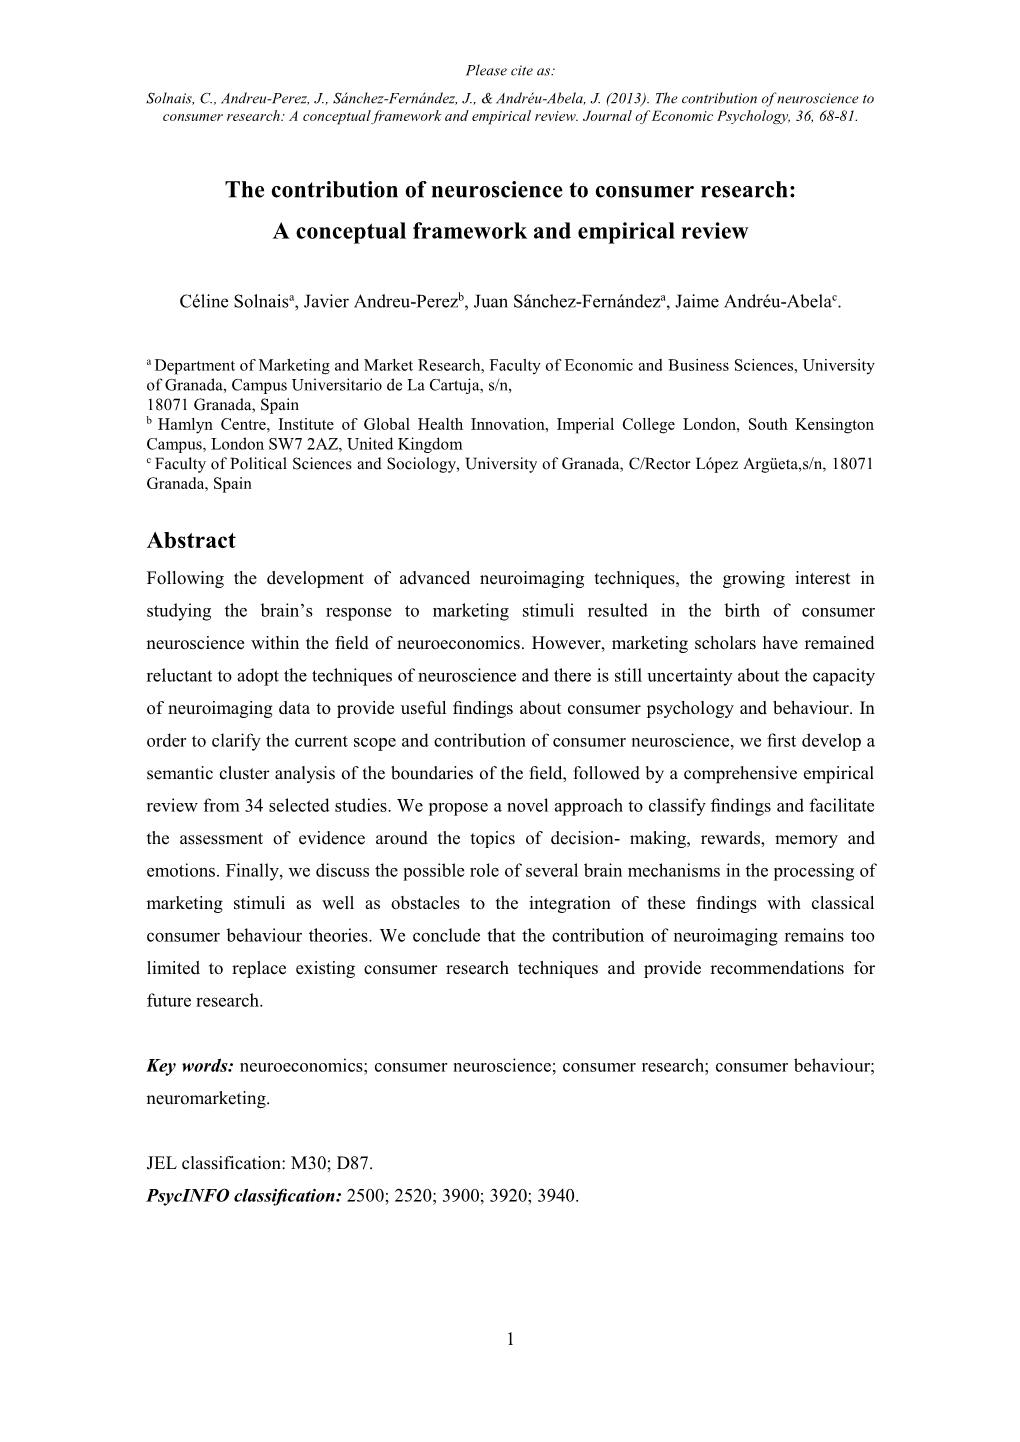 The Contribution of Neuroscience to Consumer Research: a Conceptual Framework and Empirical Review